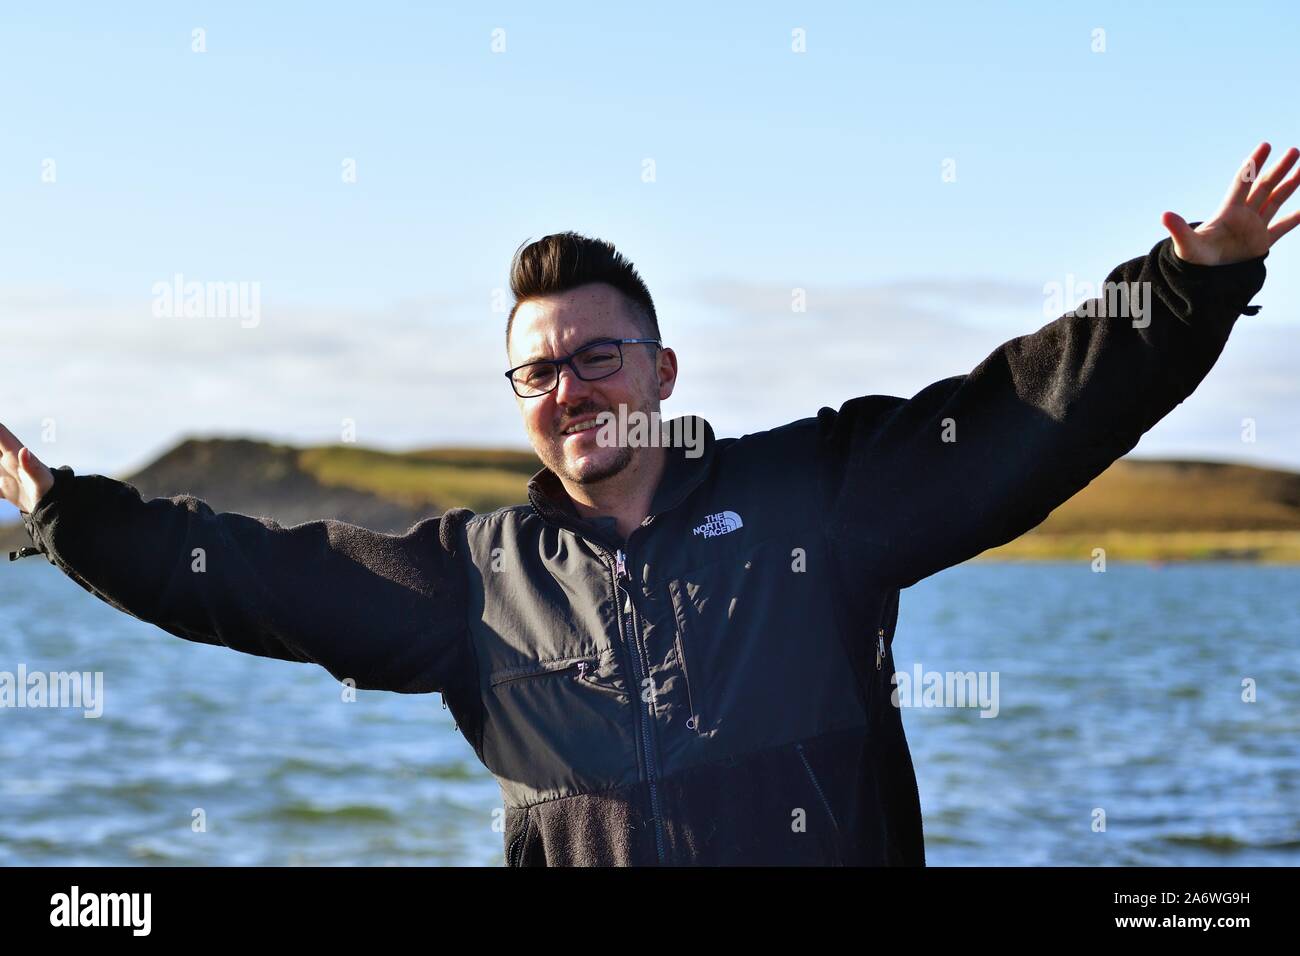 Lake Myvatn, Iceland. A tourist enjoys the shoreline along the cool, blue waters of Lake Myvatn in Northern Iceland. Stock Photo